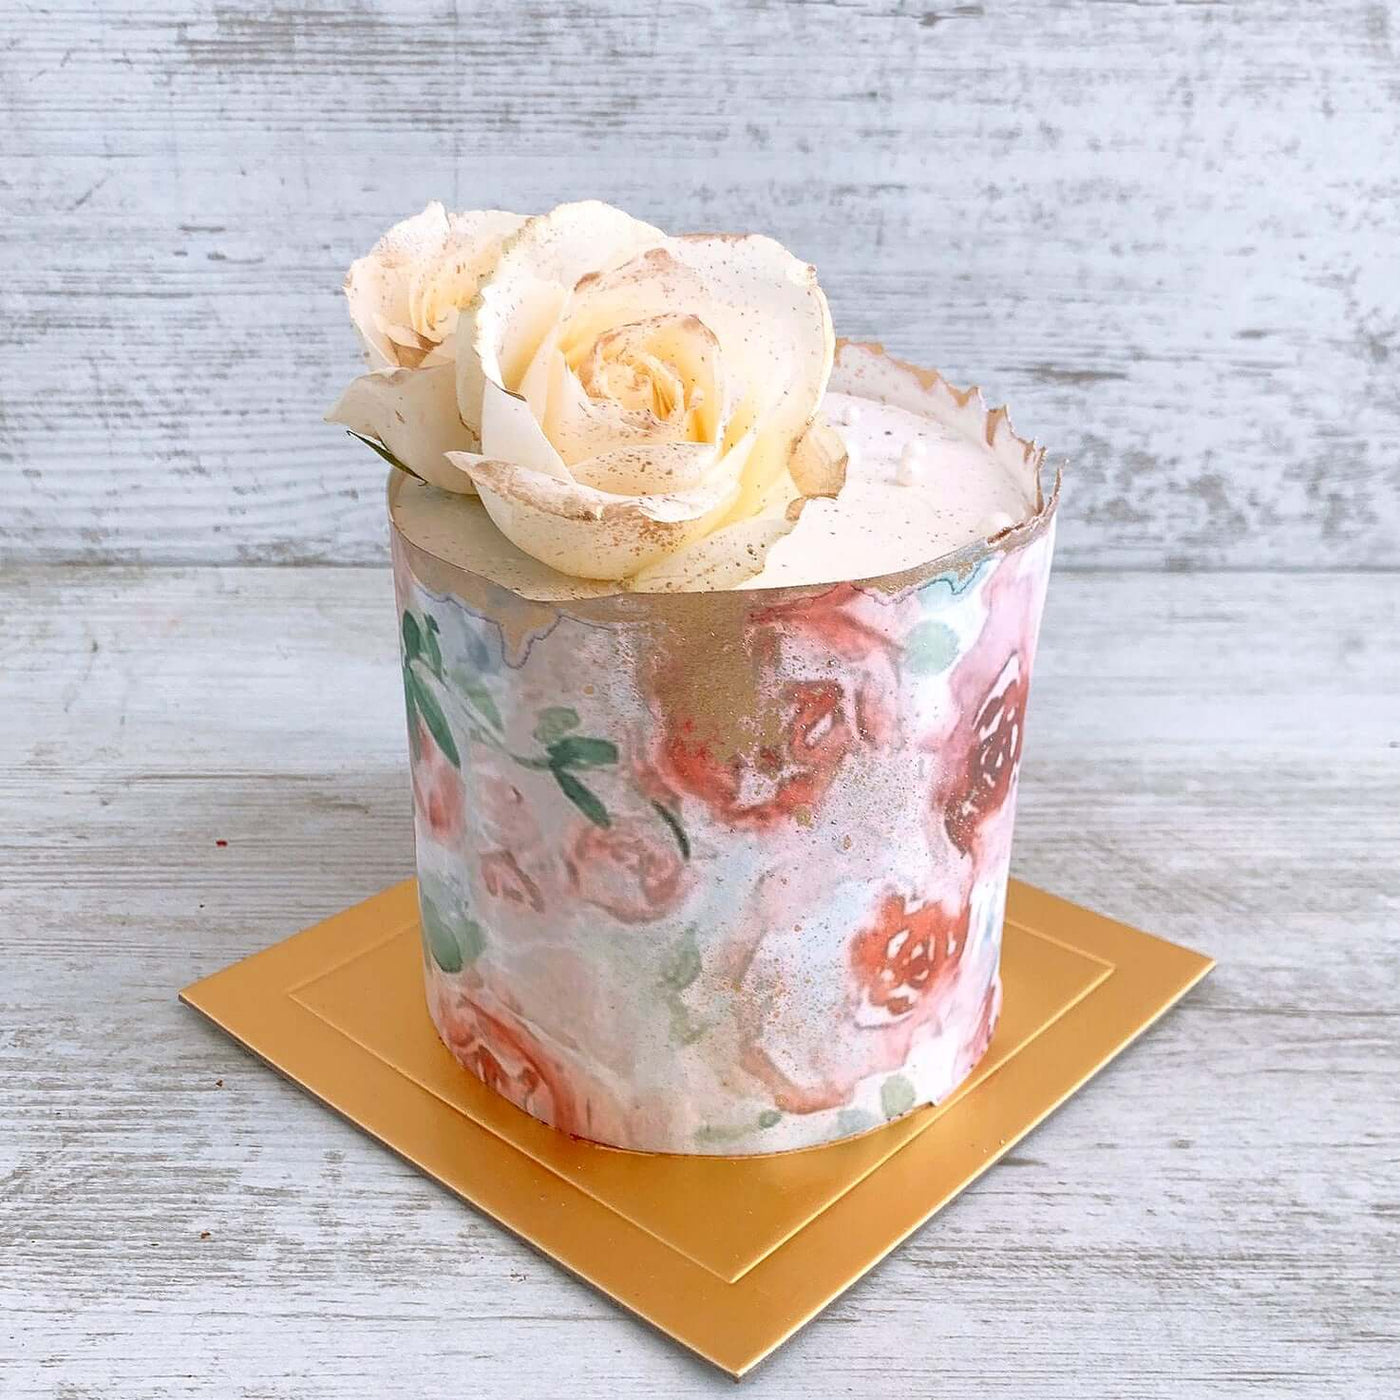 Mini-printed-floral-Cake-with-Flowers-Dodomarket-delivery-Mauritius